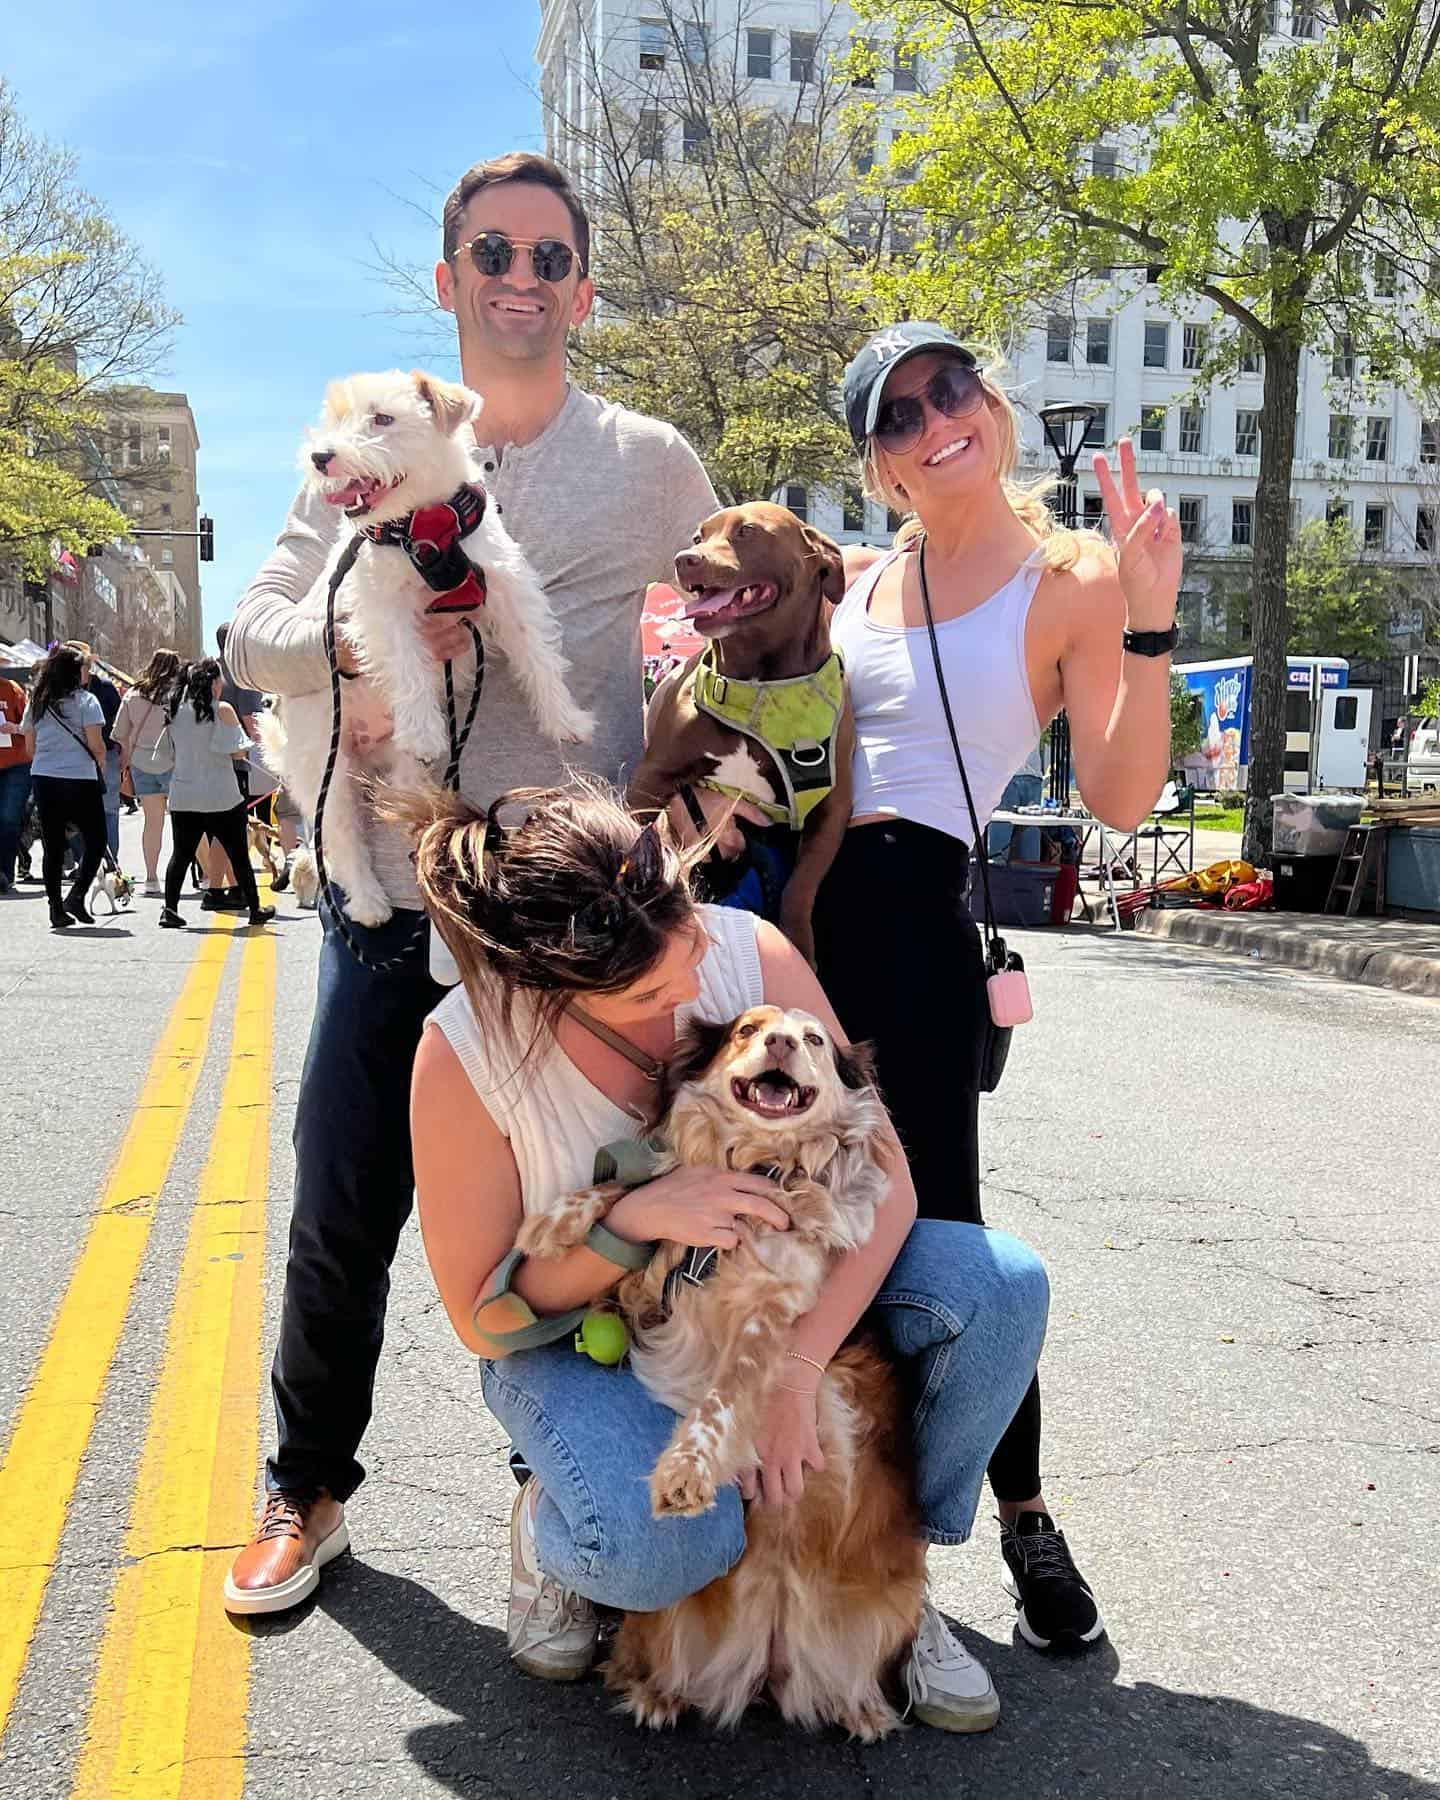 Parents and dogs on vacation in a dog-friendly city